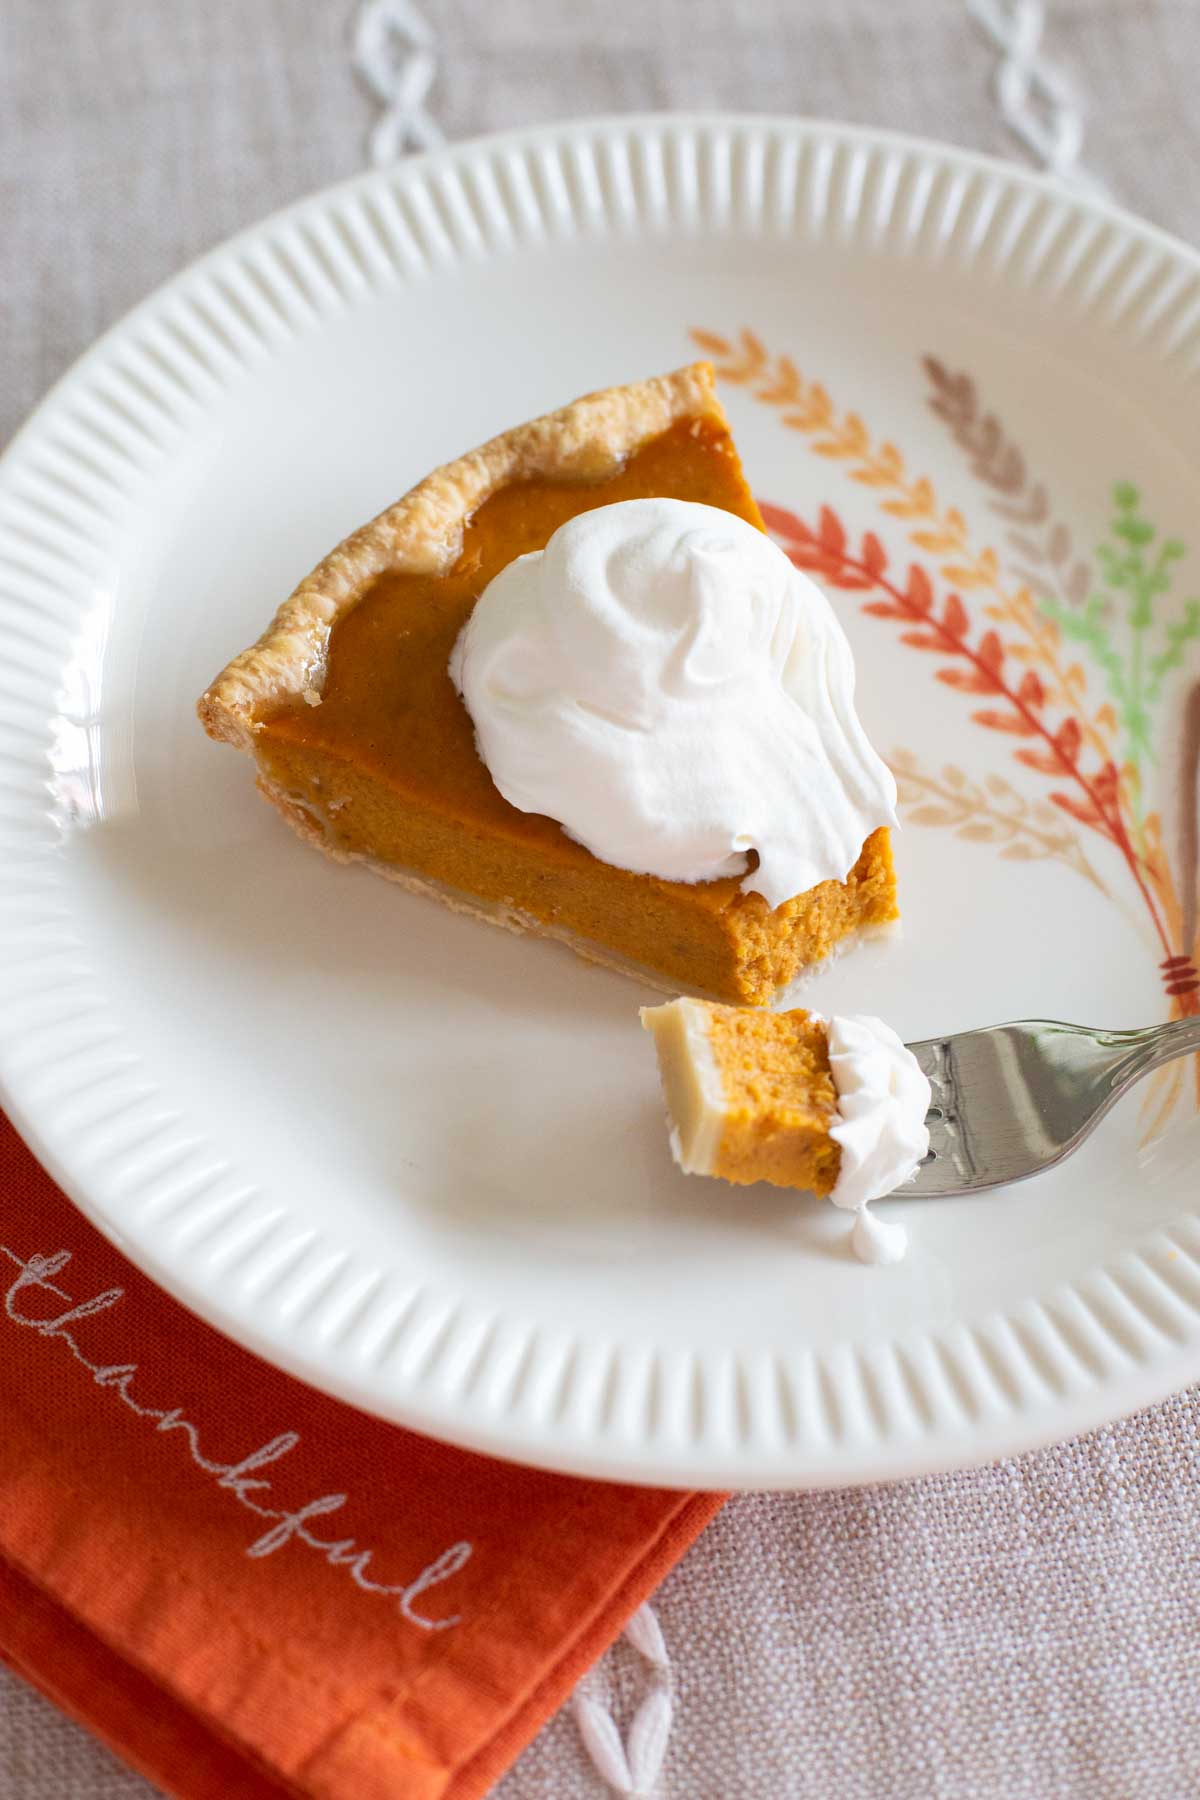 The slice of pumpkin pie is on a fall plate with an orange napkin that says "Thankful."